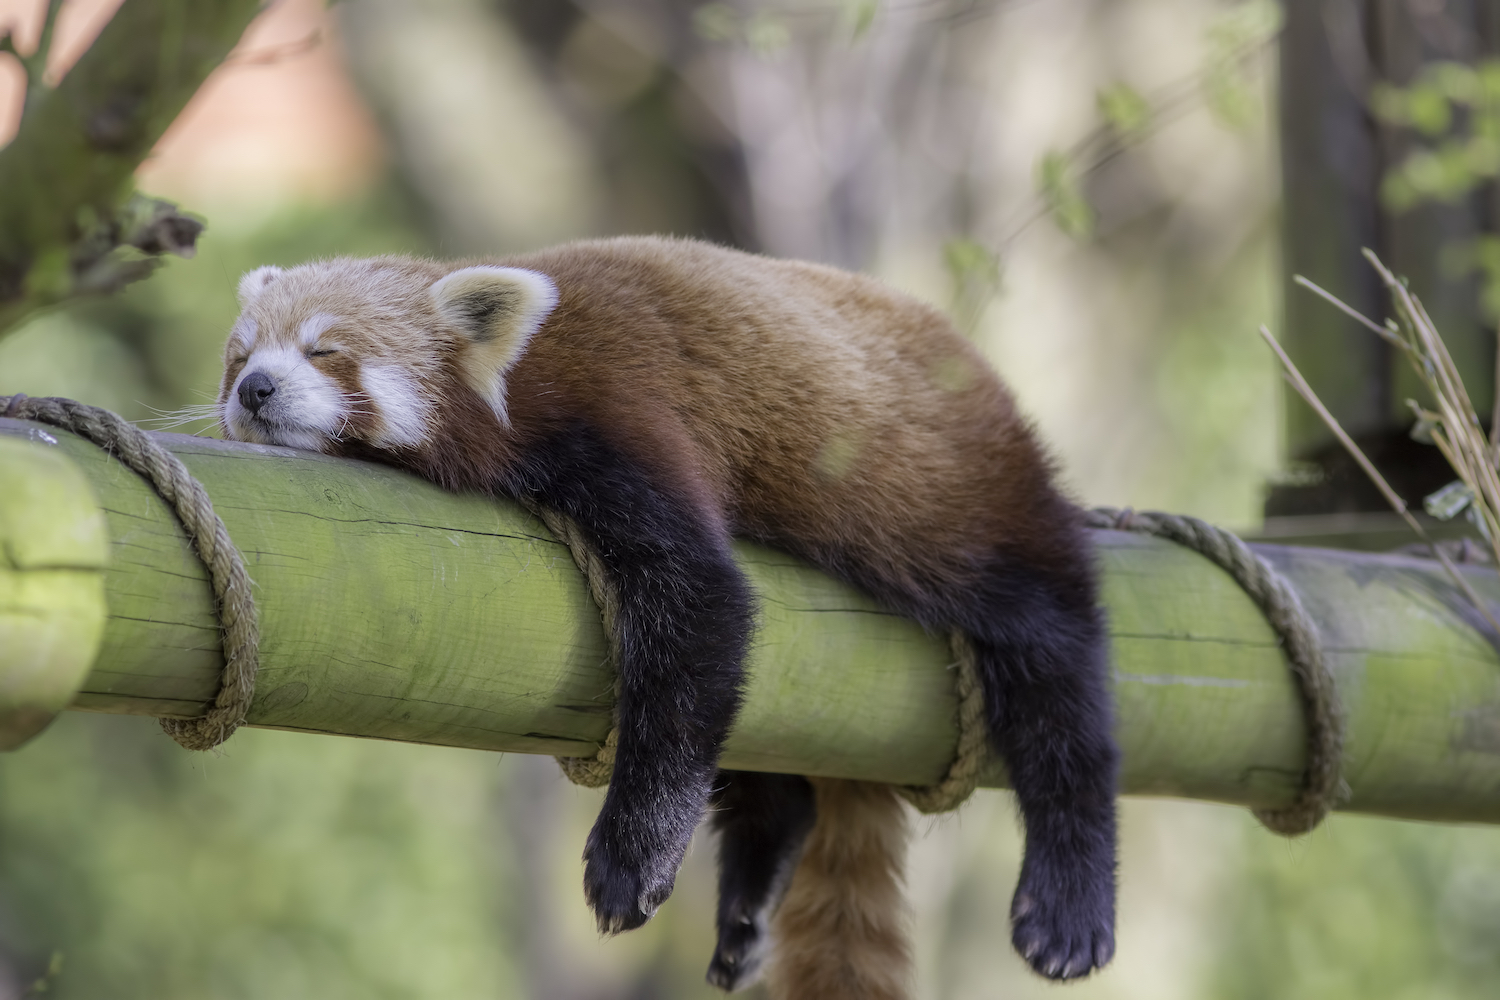 Which animals never fully fall asleep?